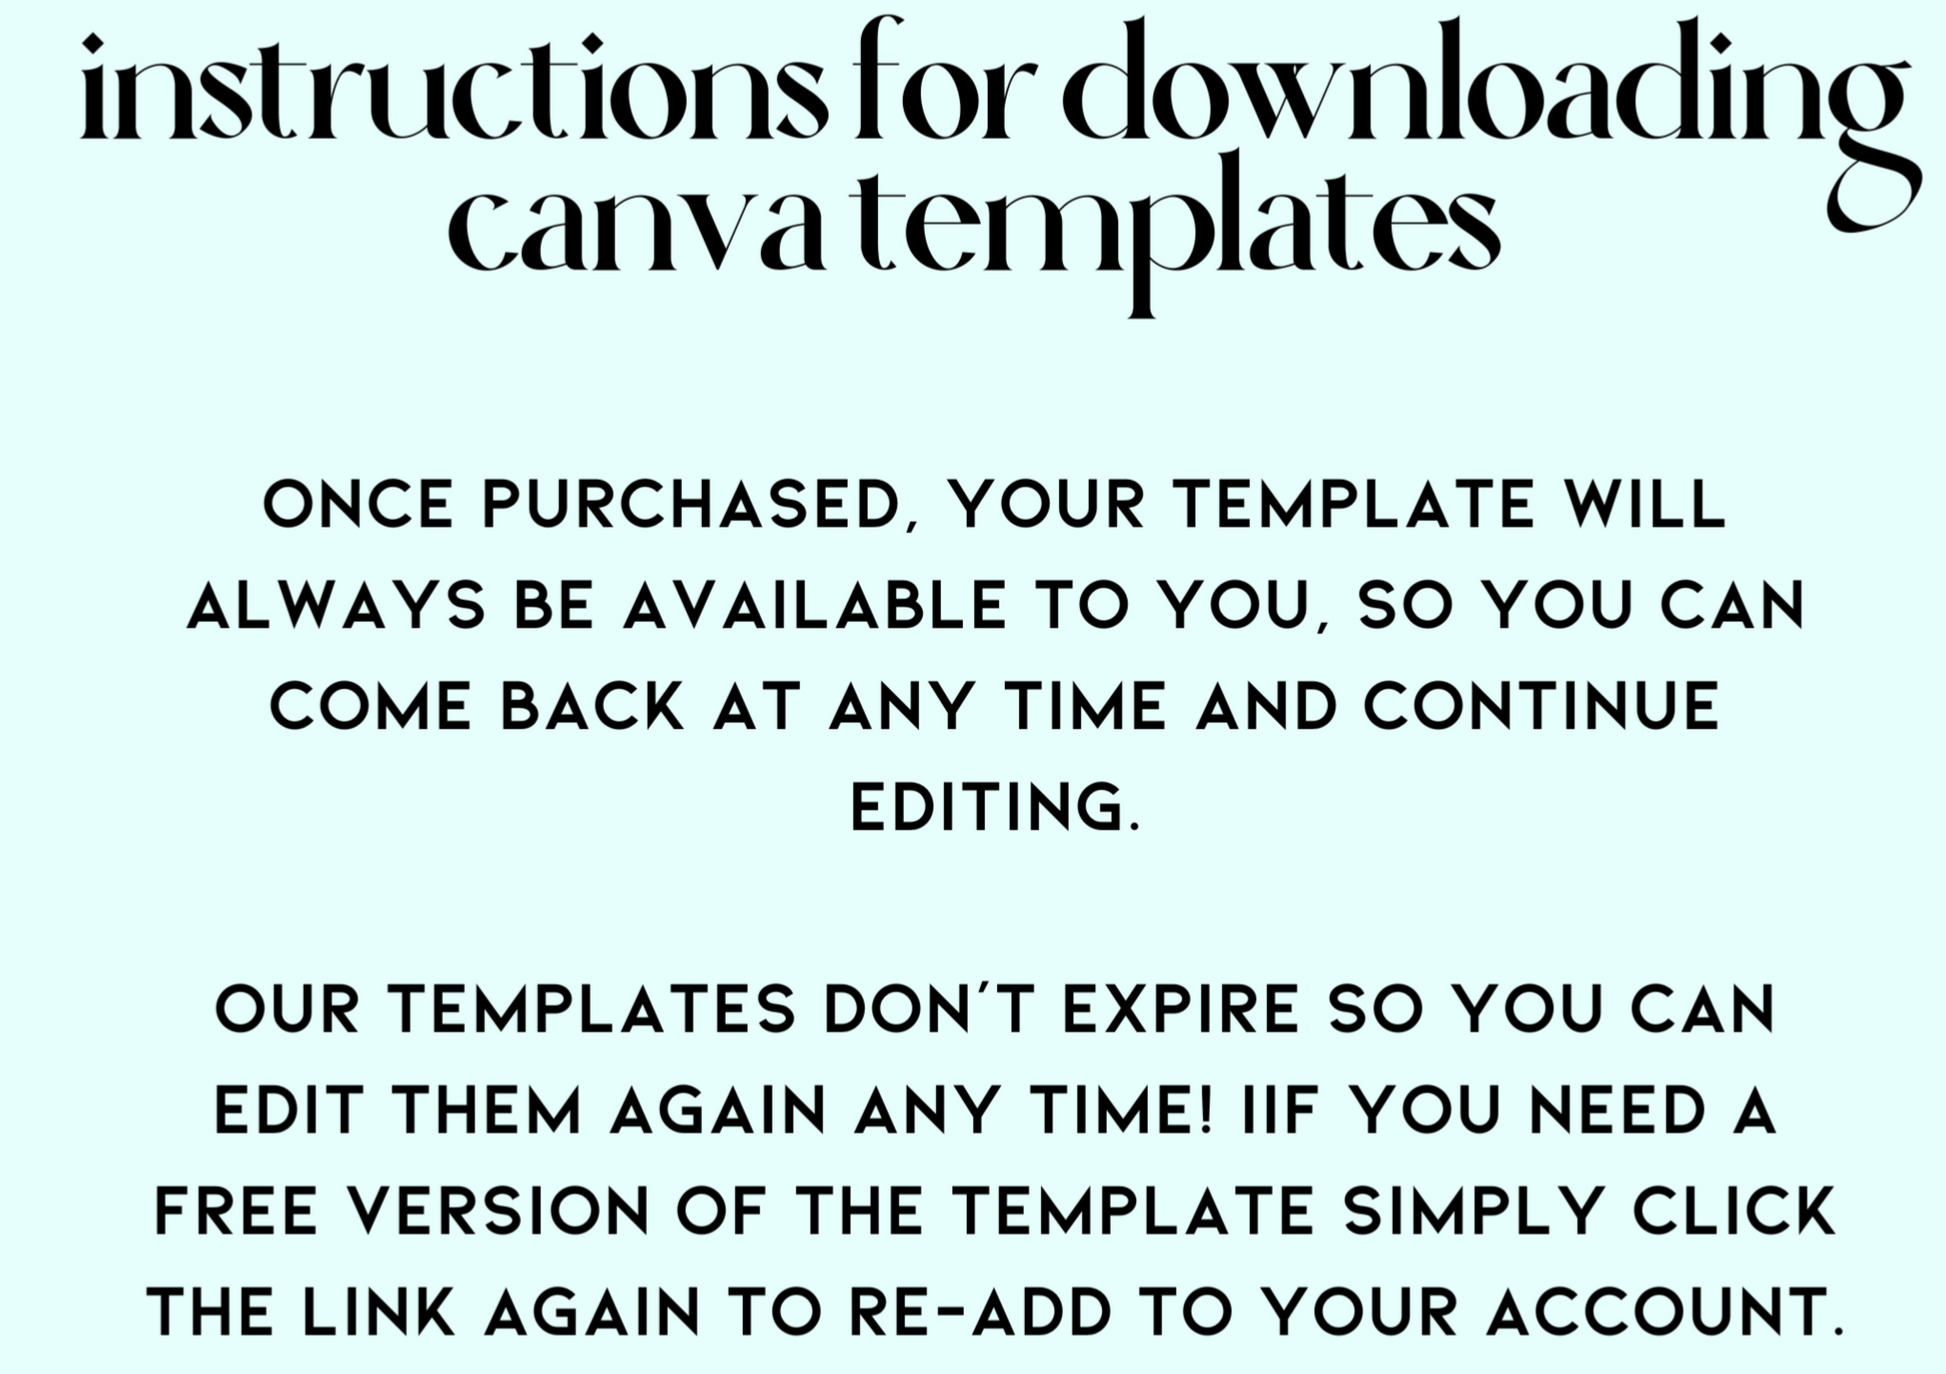 instructions for canva templates